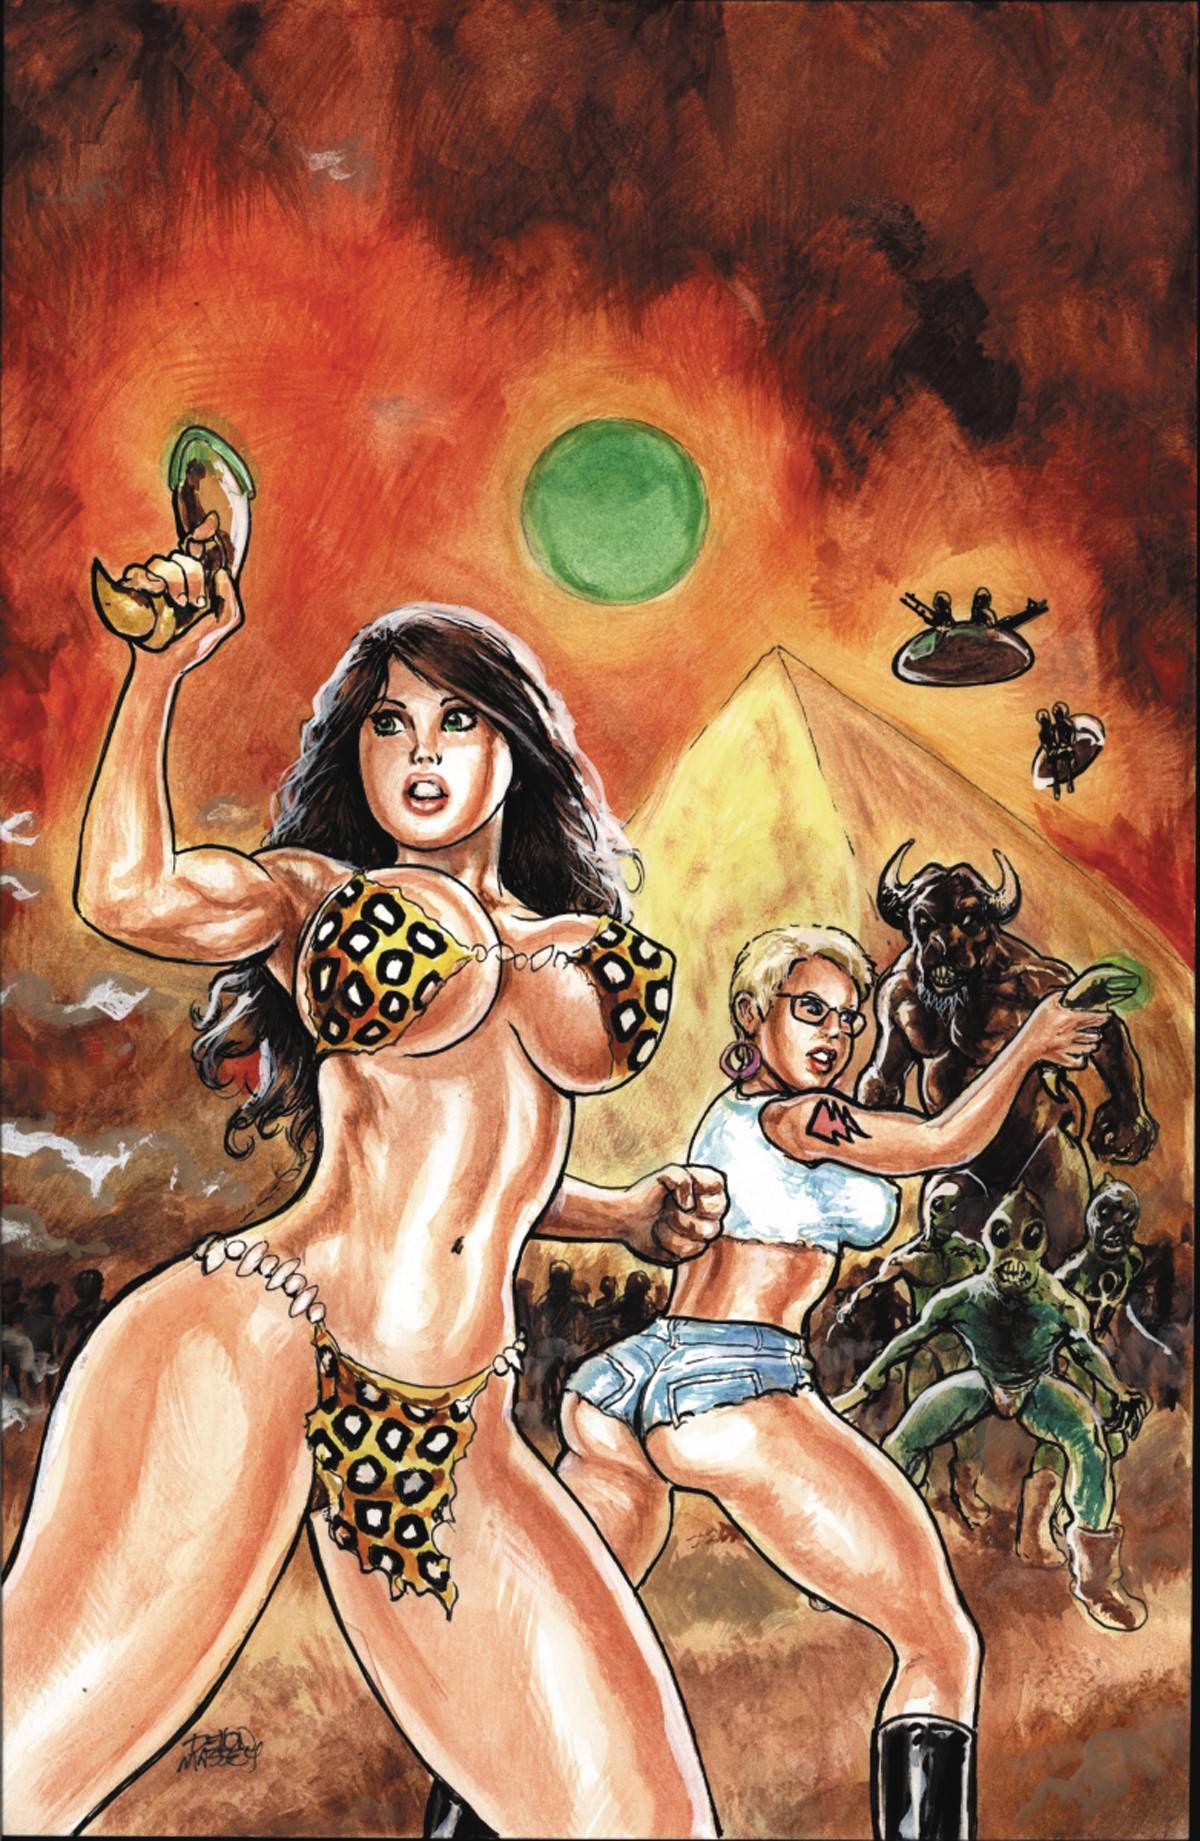 Cavewoman: Trouble For Two #1 Comic